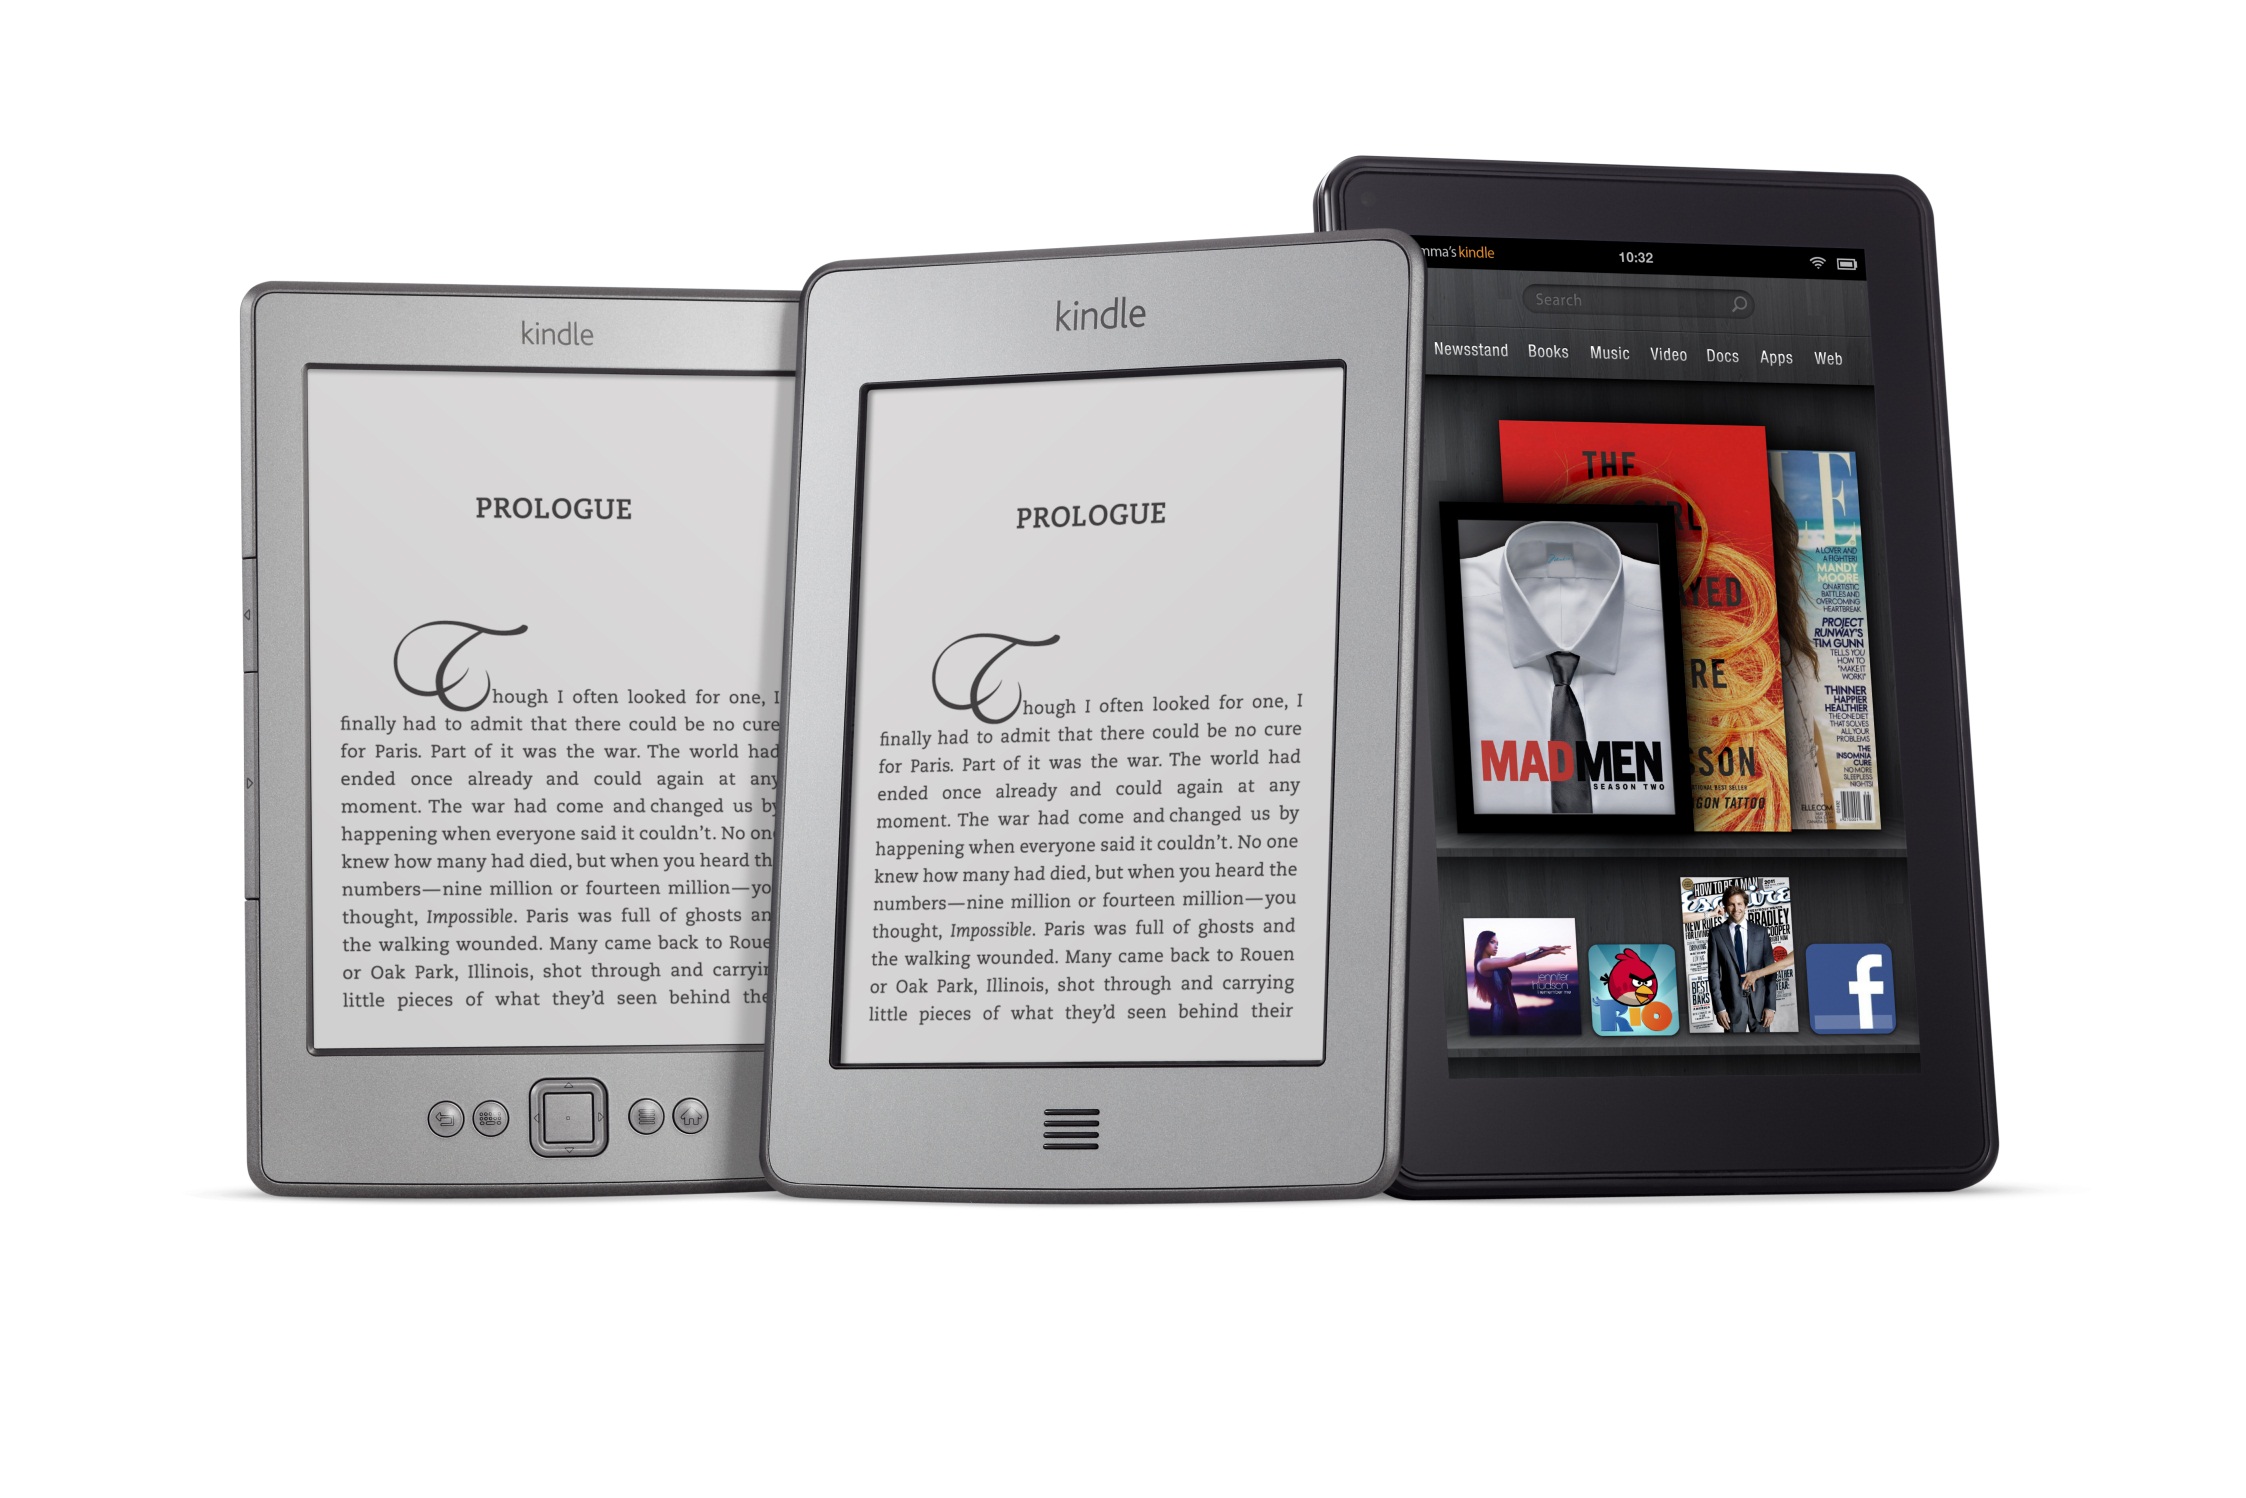 Amazon will focus more on tablets than ereaders. Twipe